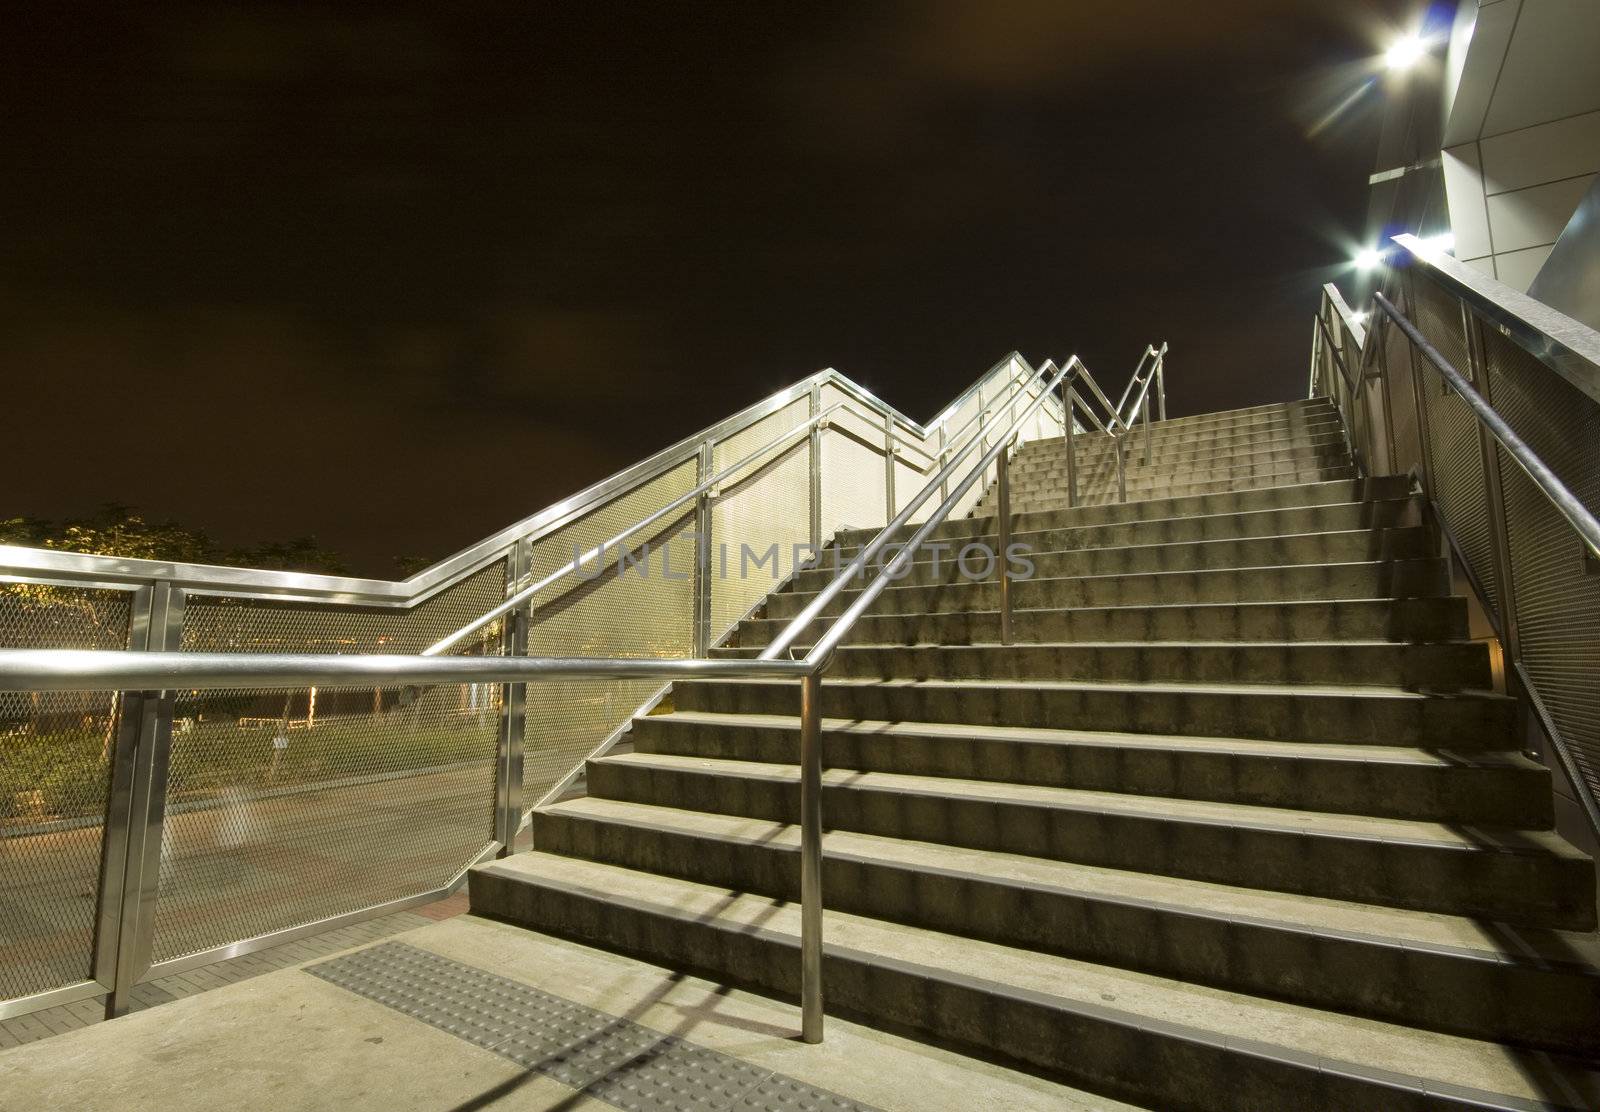 It is a stair overview at night.